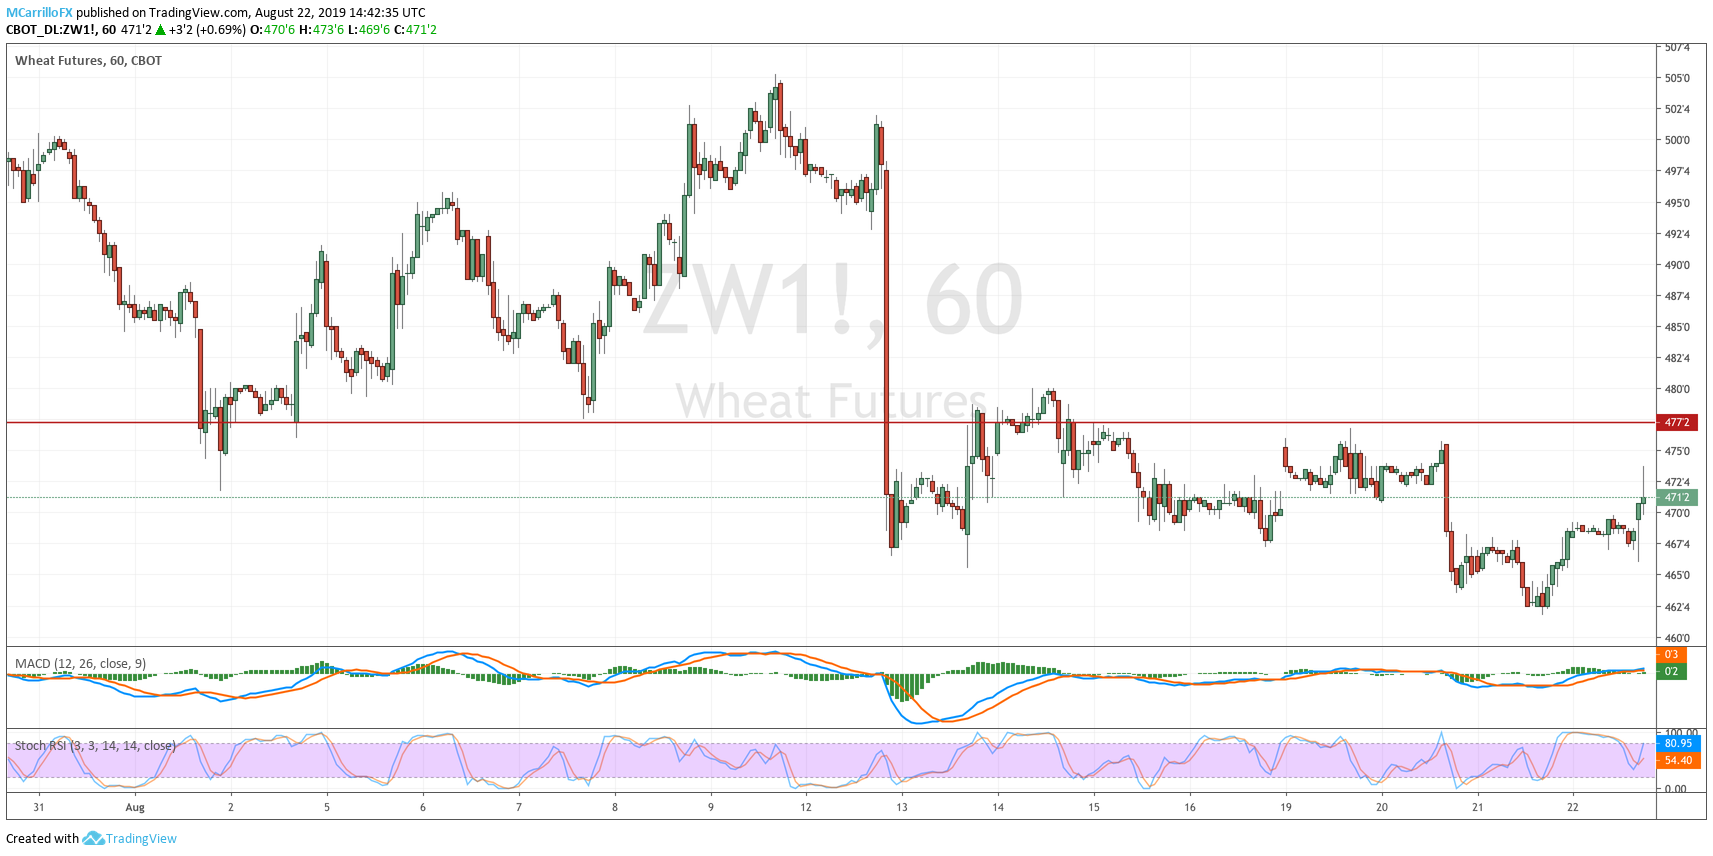 ZW1 Wheat Futures 1-hour chart August 22